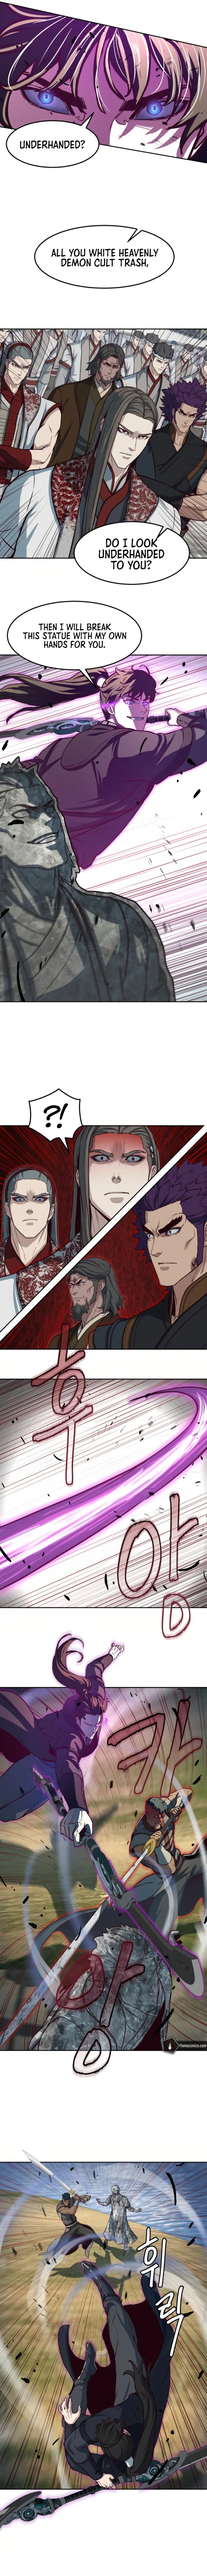 Sword Fanatic Wanders Through The Night - Chapter 93 Page 3